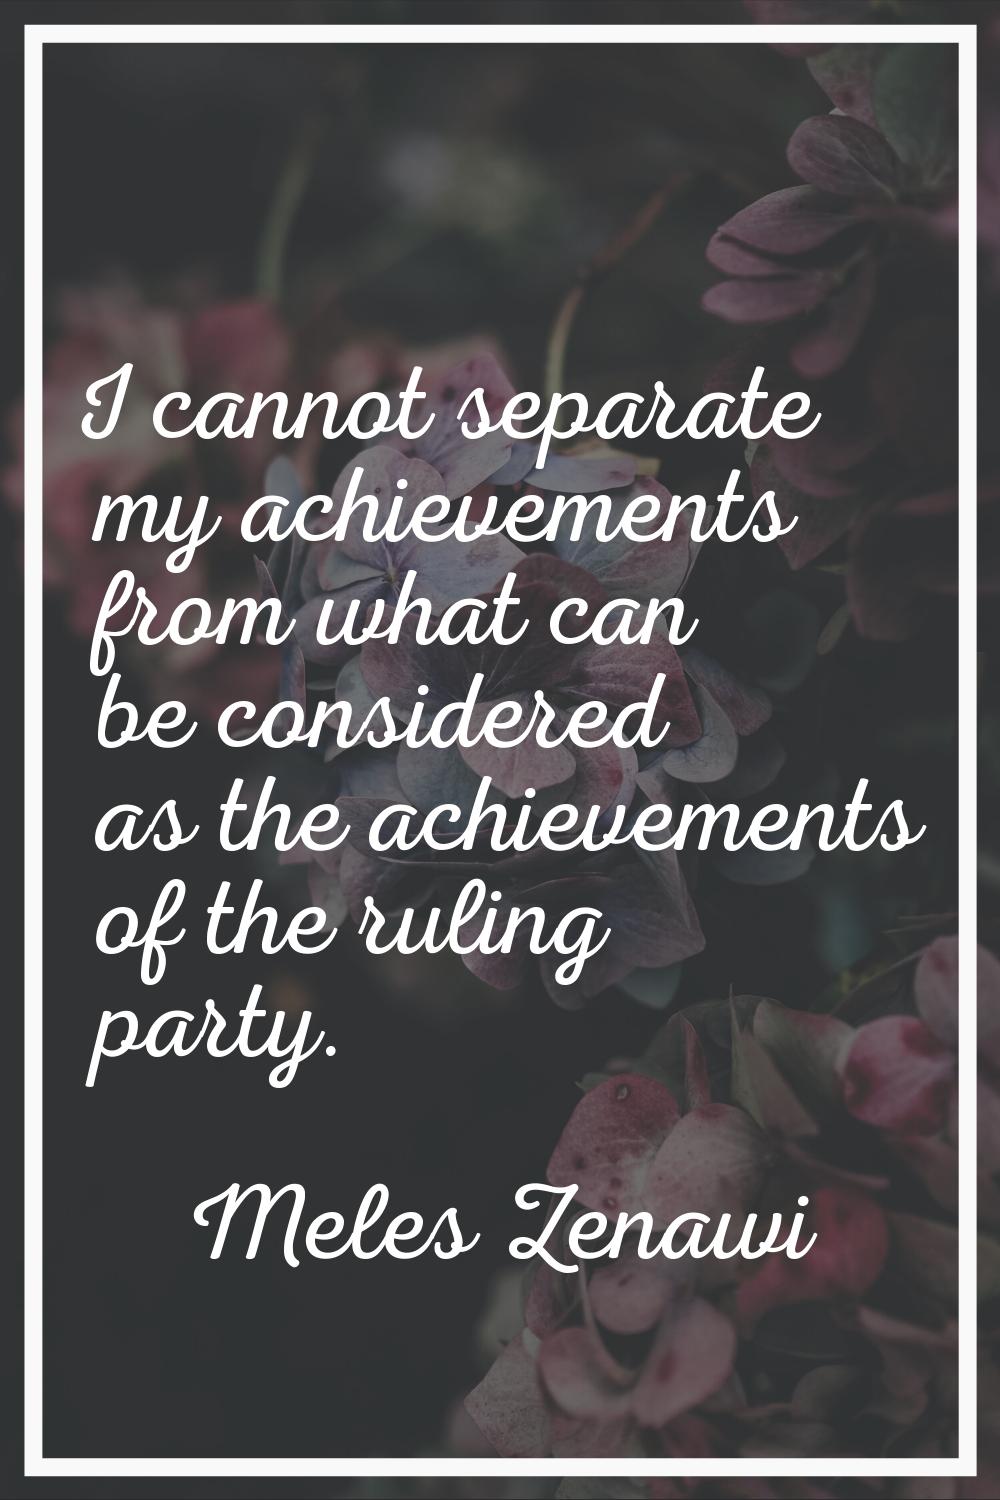 I cannot separate my achievements from what can be considered as the achievements of the ruling par